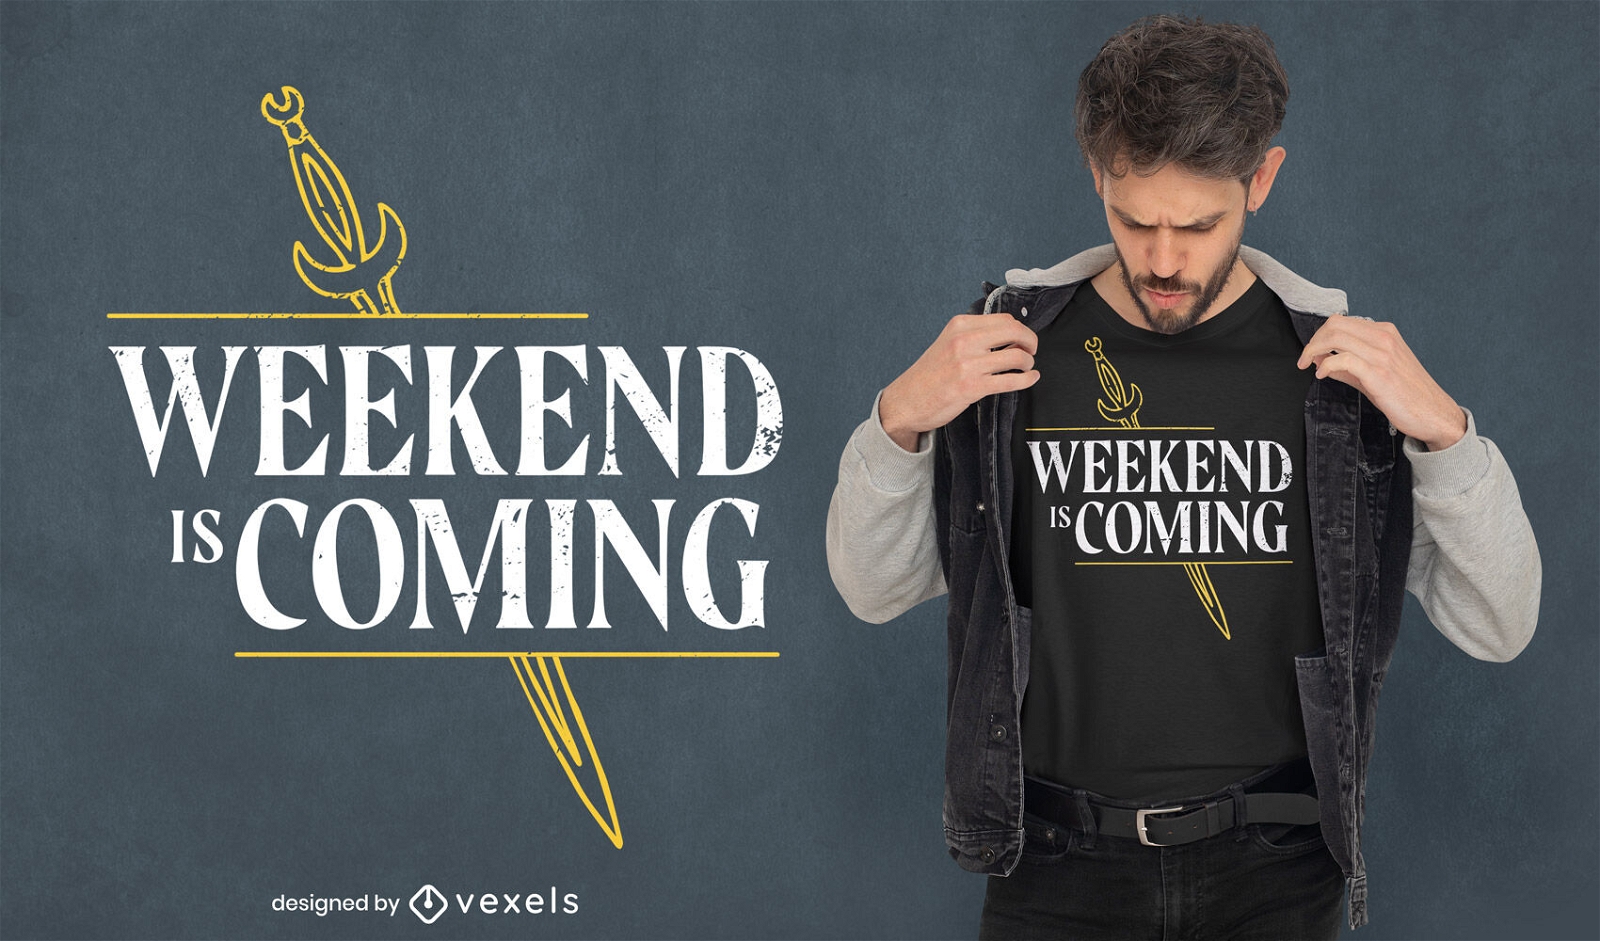 Weekend is coming t-shirt design